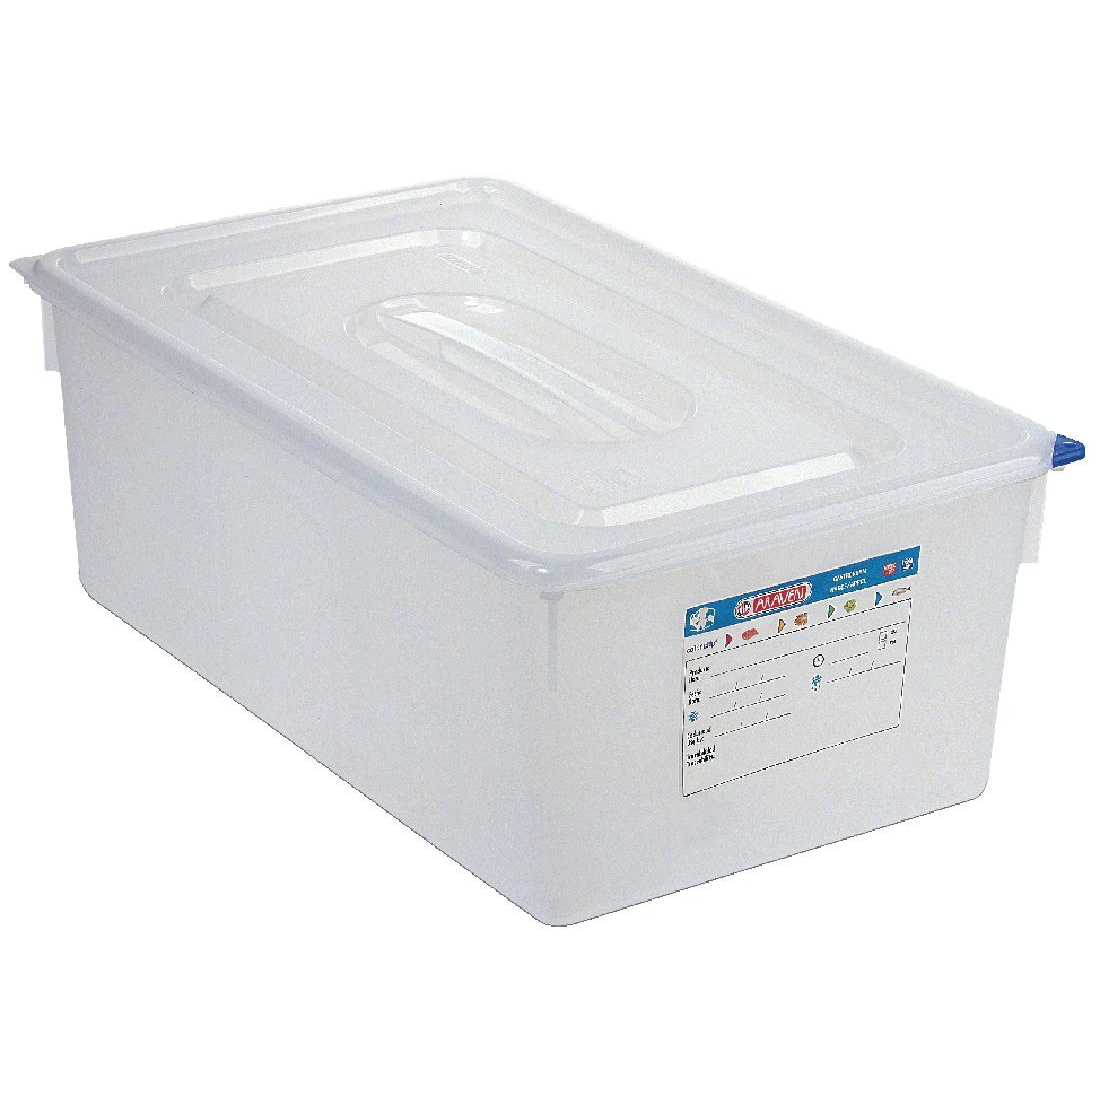 Araven 1/1 GN Food Container 28Ltr